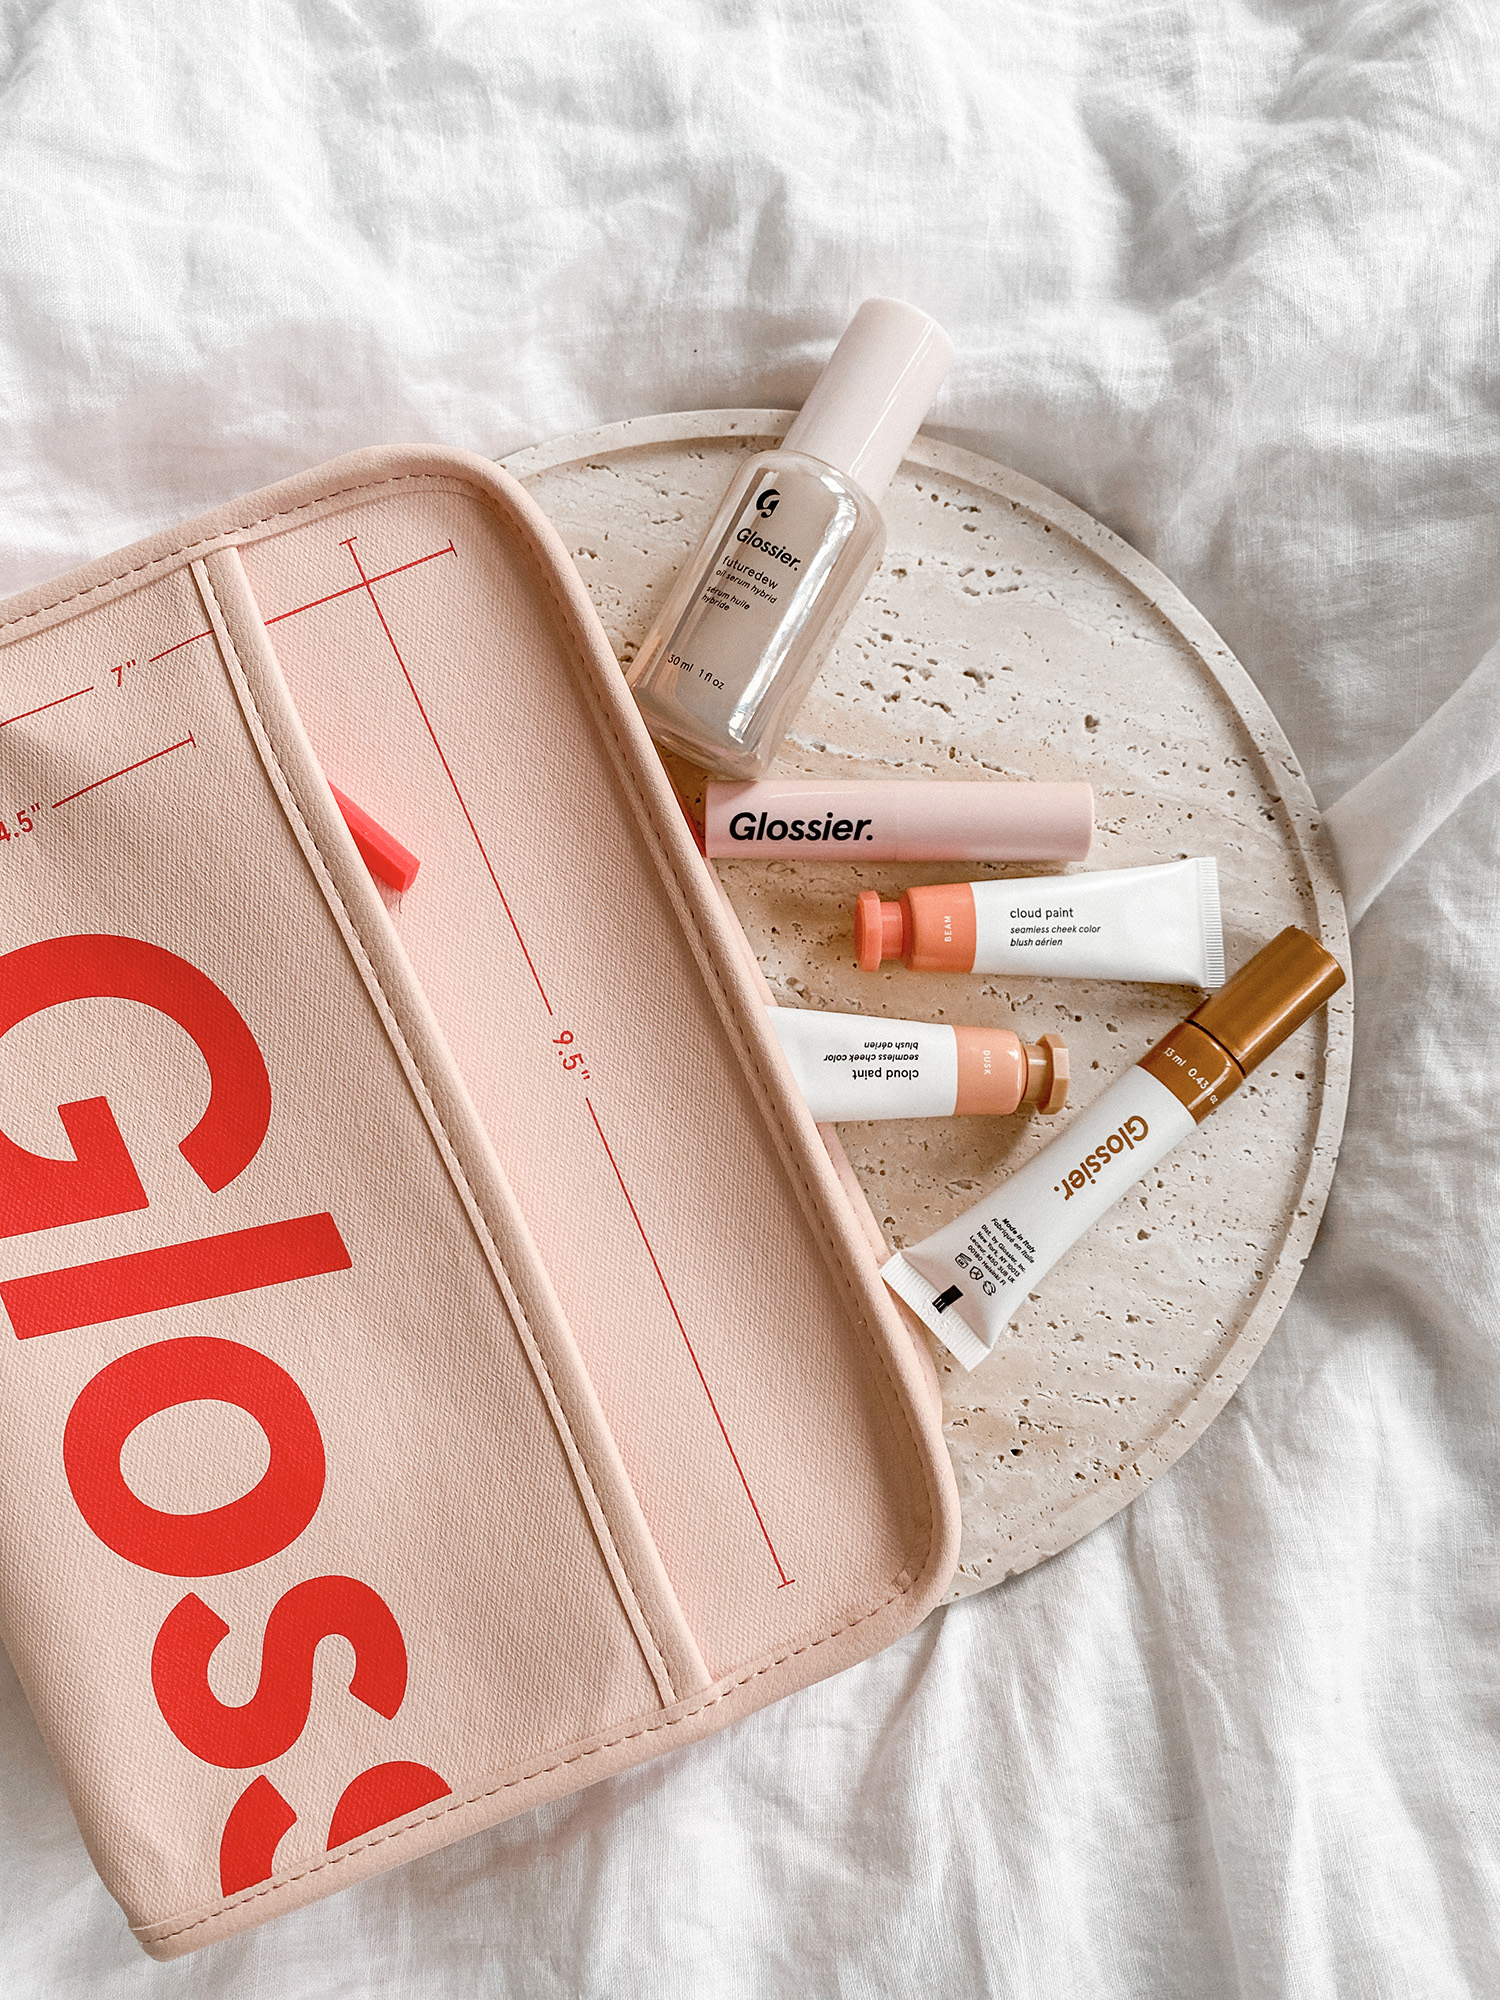 Glossier Review